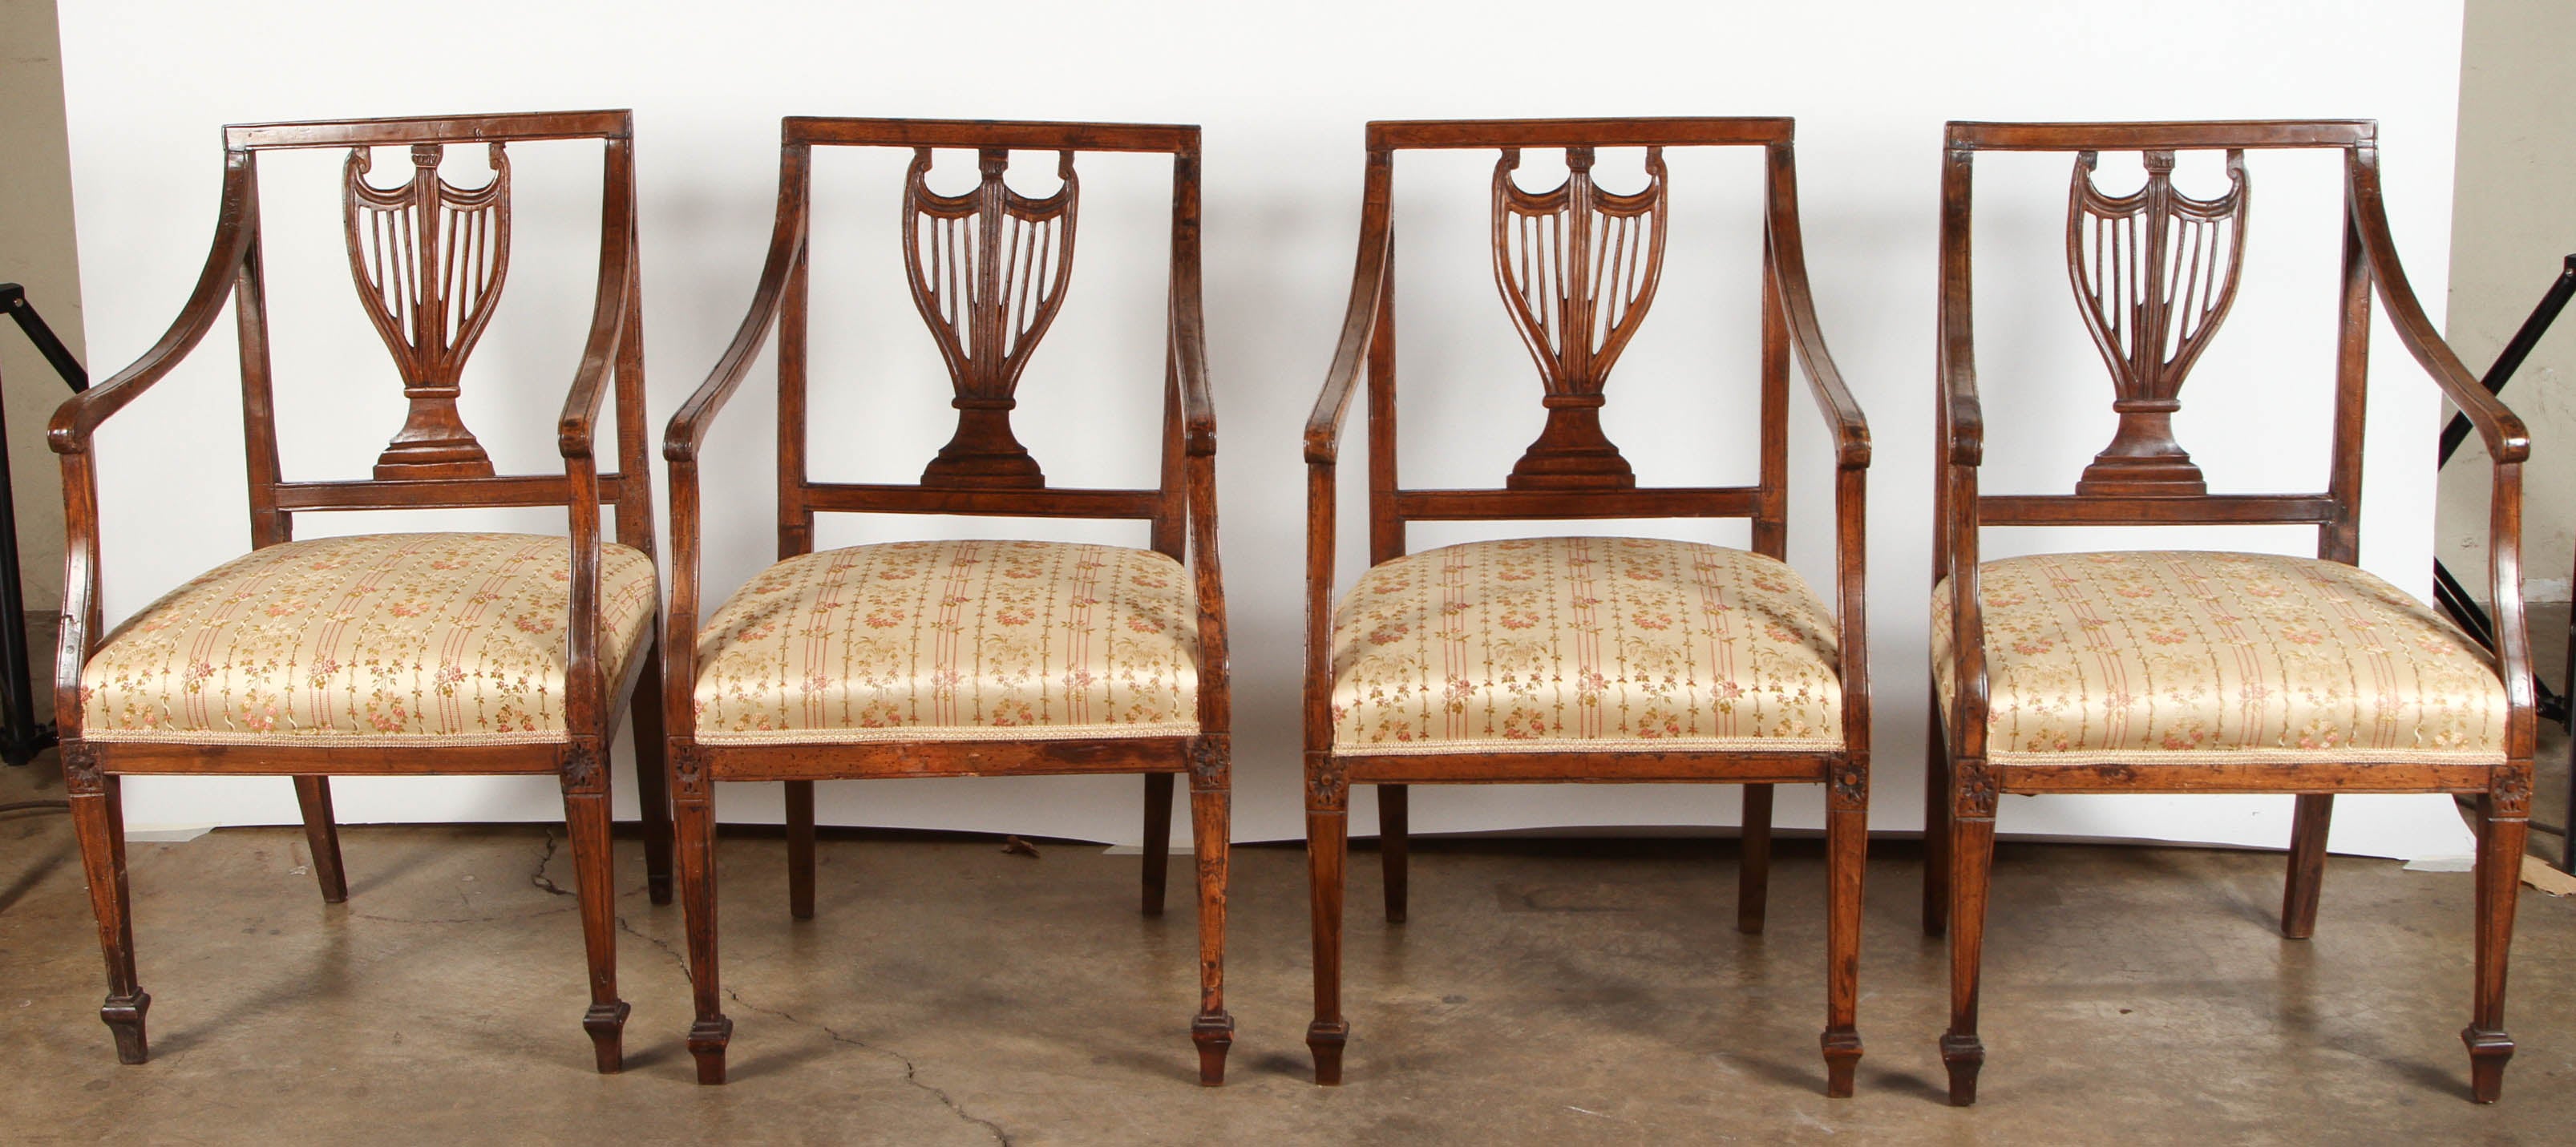 Set of Four 18th Century French Chairs